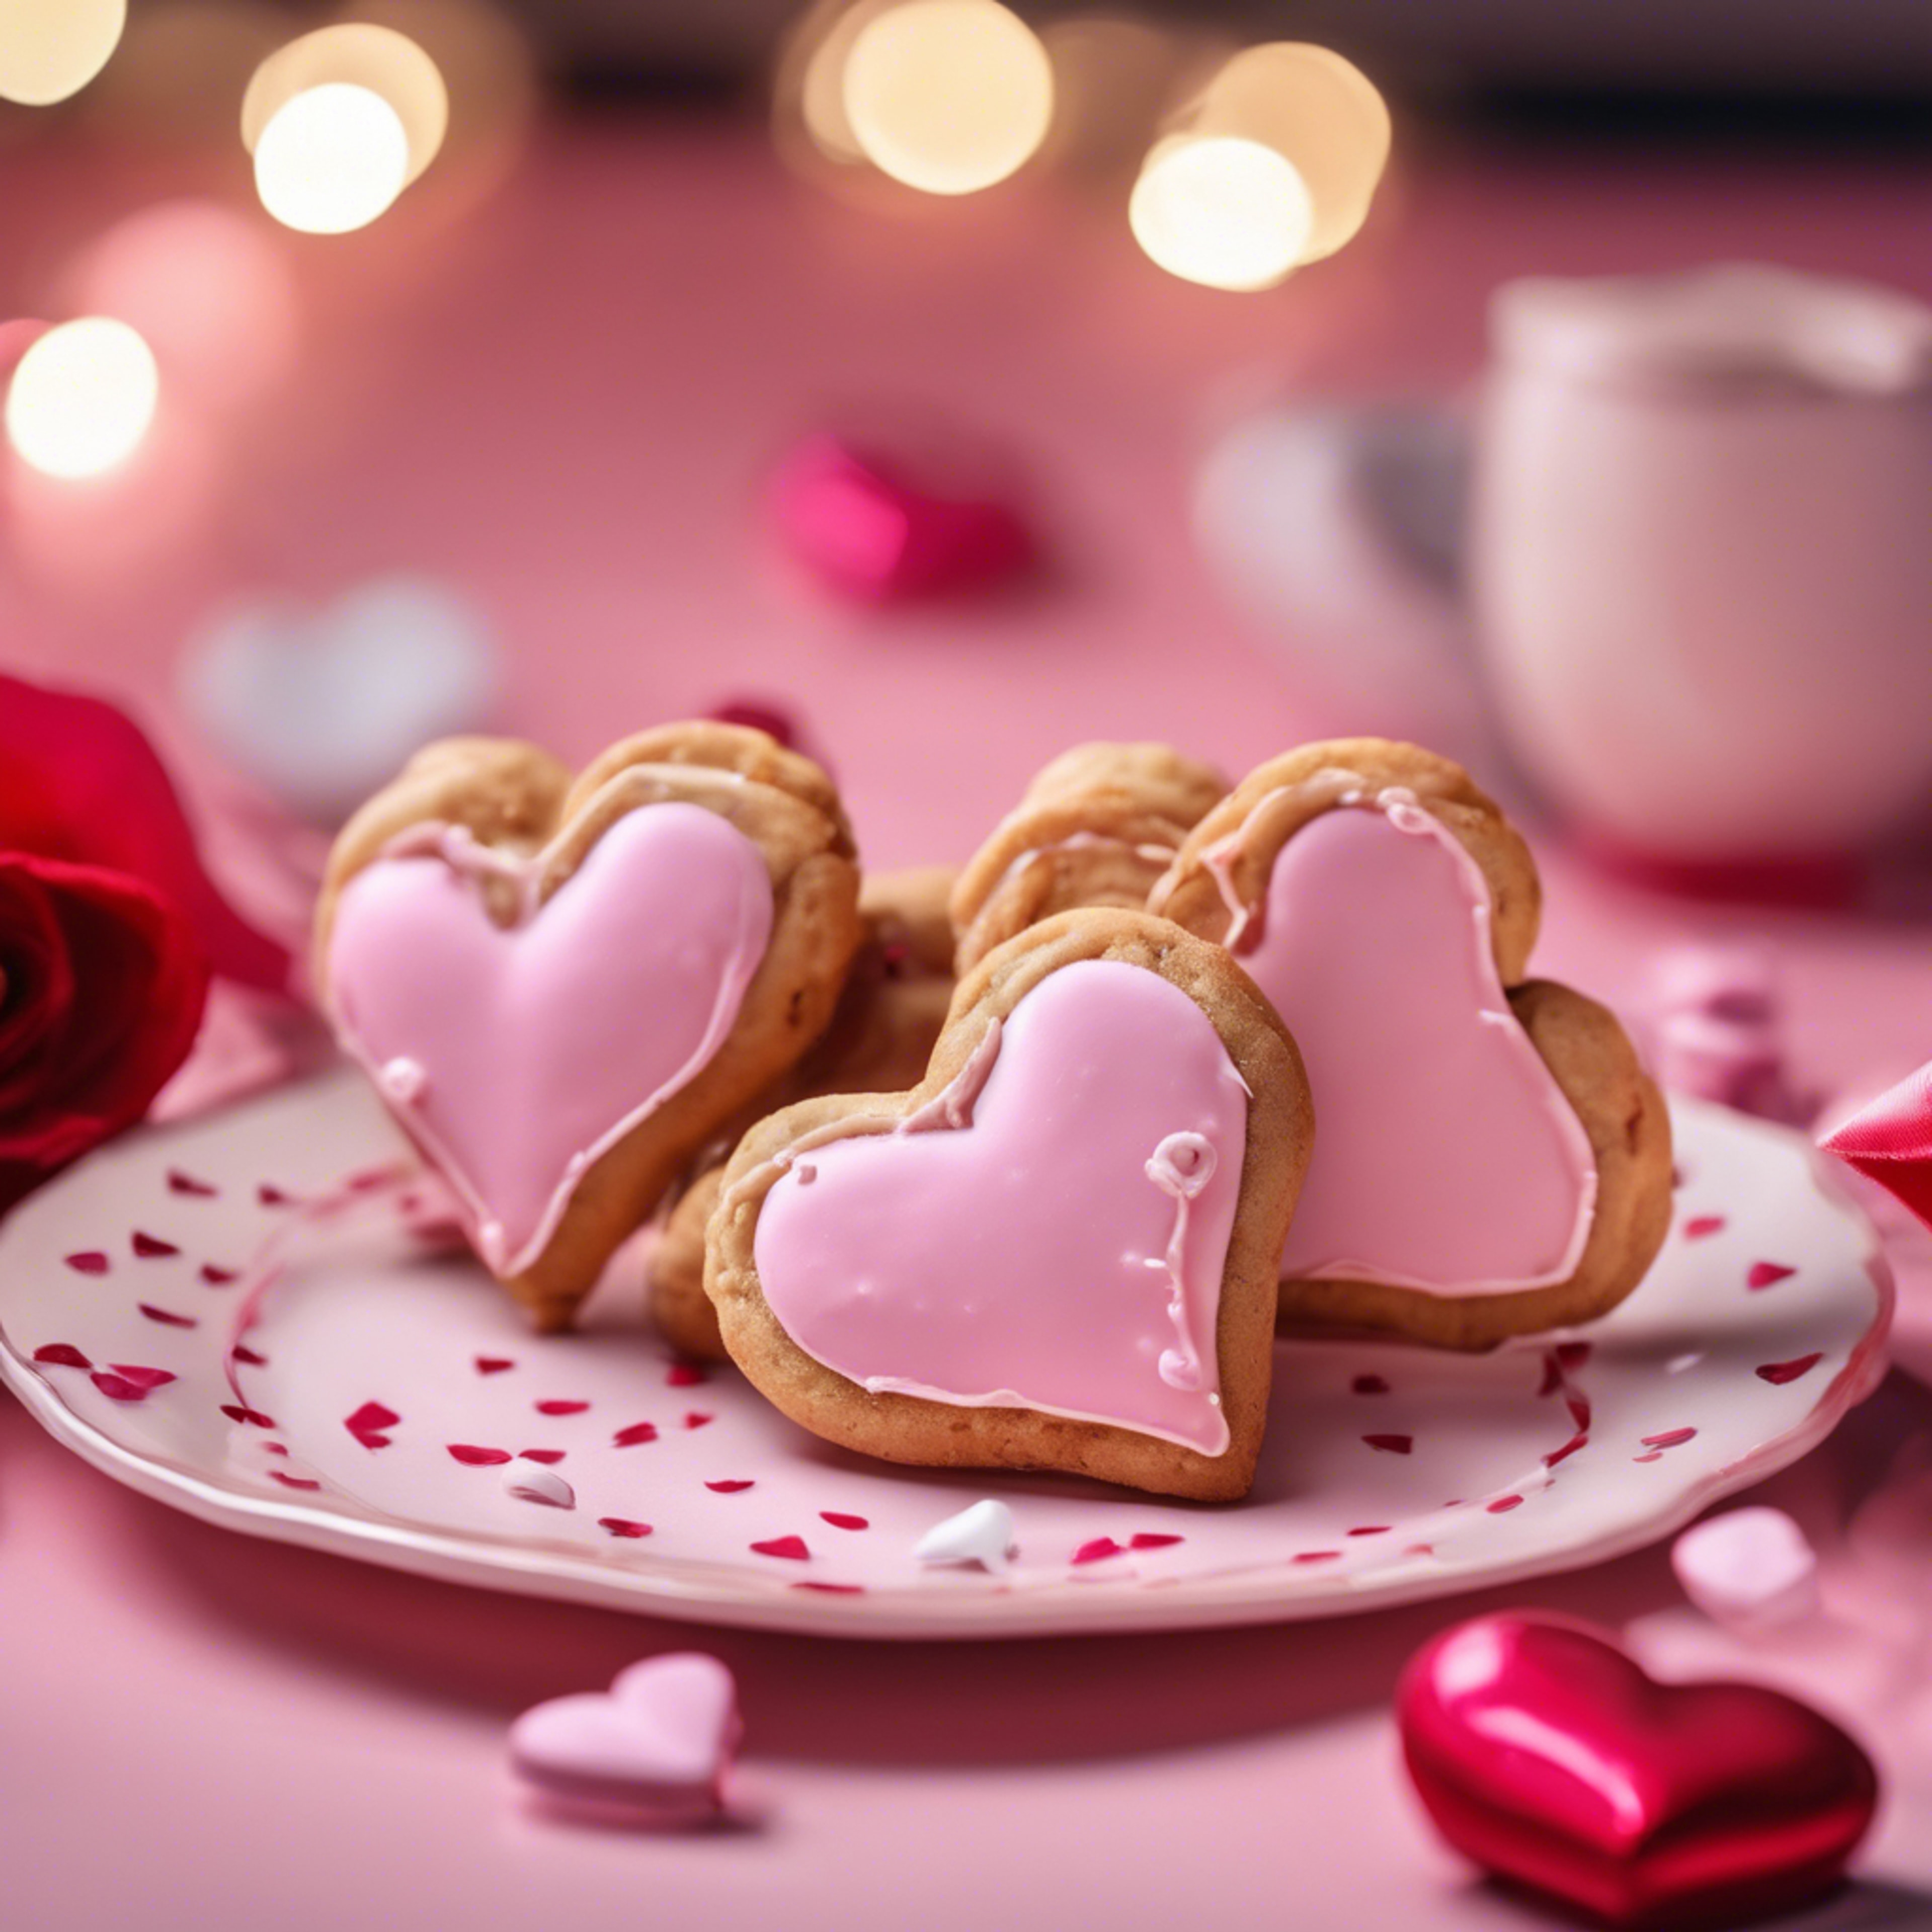 A pair of heart-shaped frosted cookies on a vibrant Valentine's day setting. Tapeta[699c1bd667c44183af85]